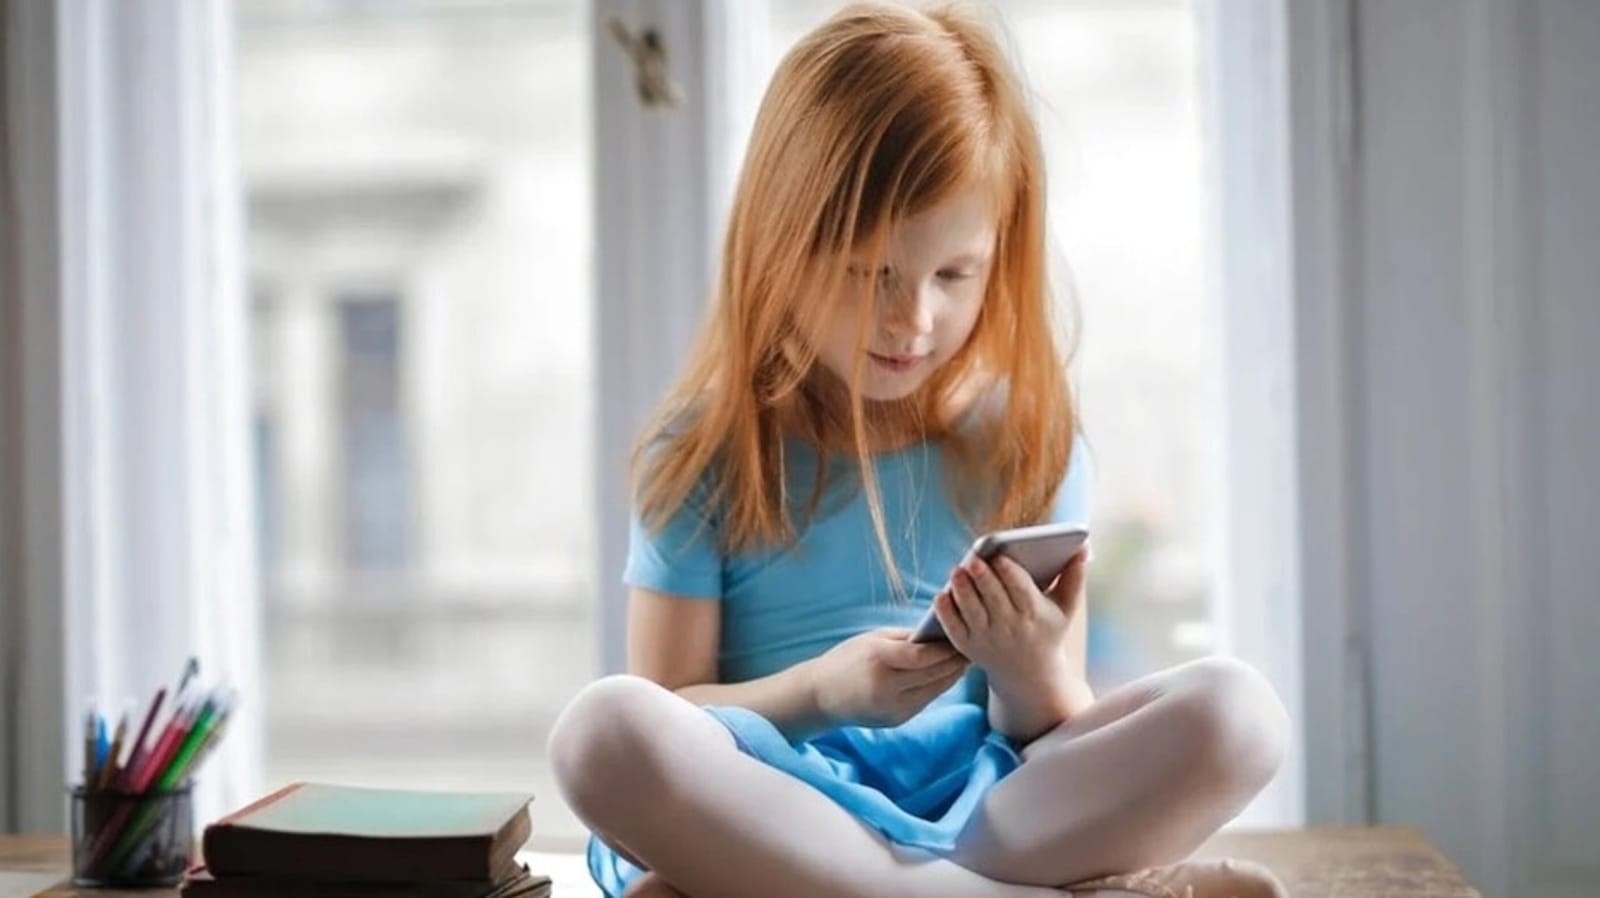 Virtual Autism: Can too much screen time make your child autistic